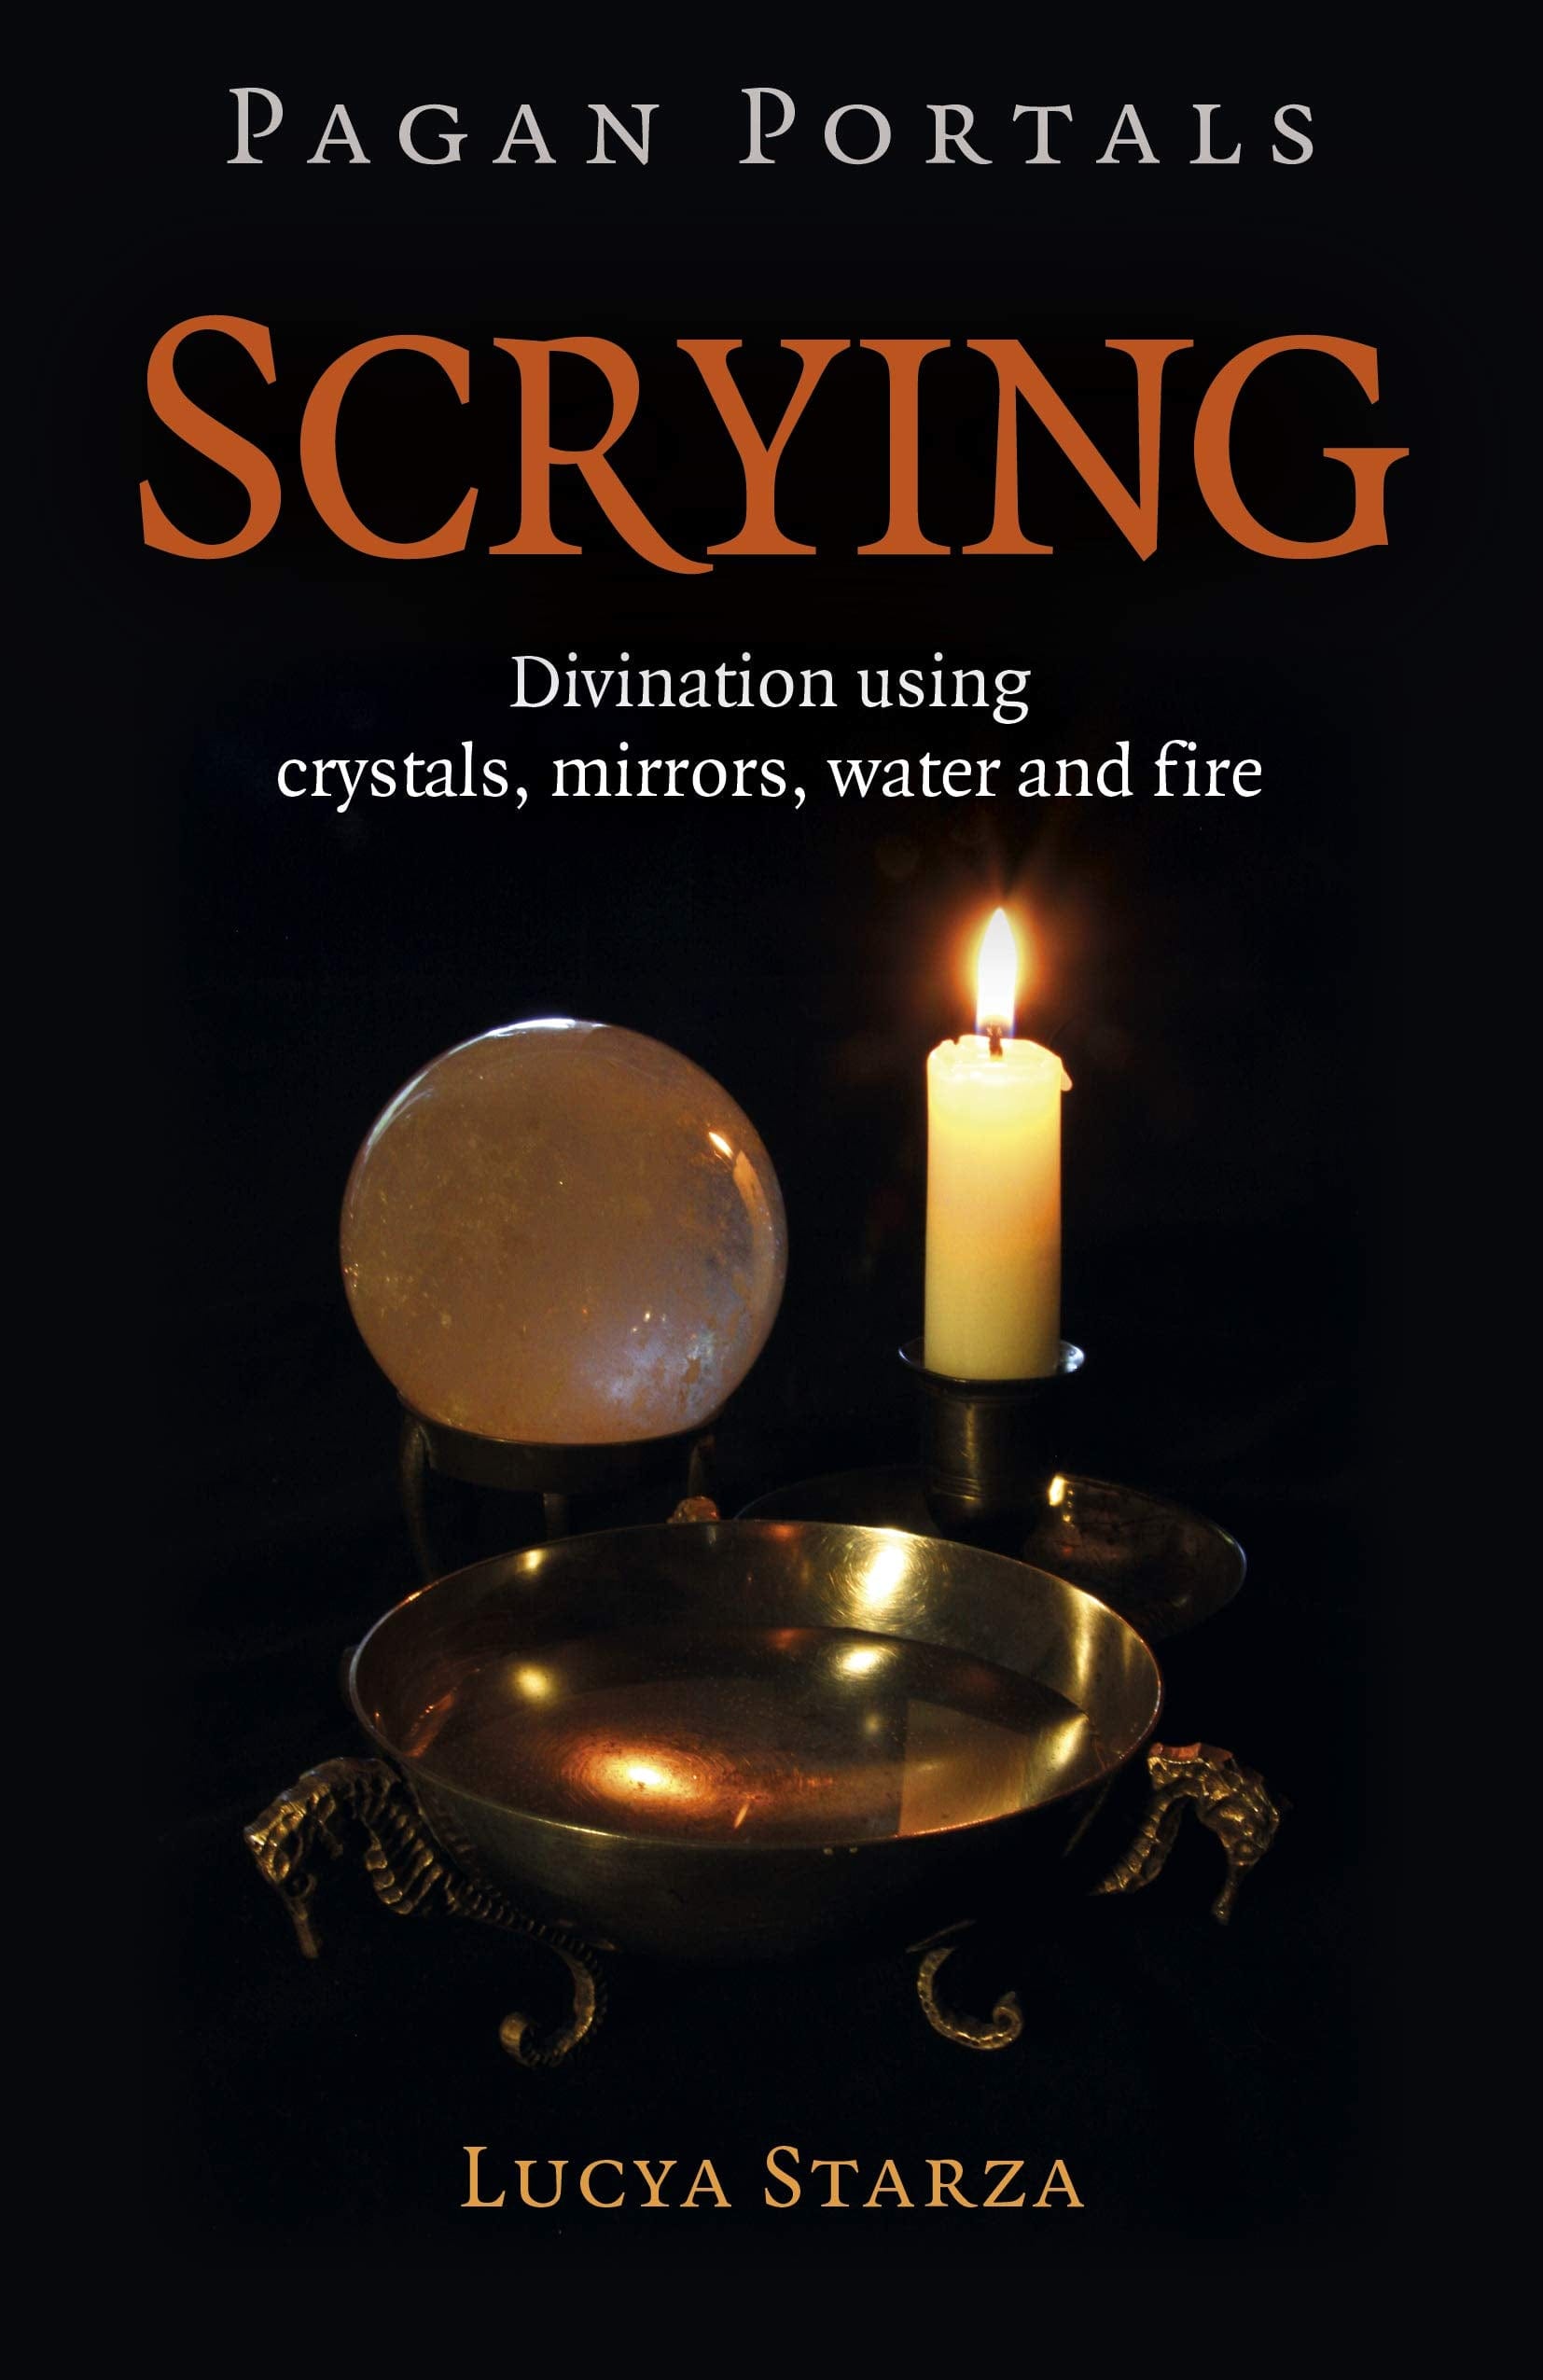 Marissa's Books & Gifts, LLC 9781789047158 Pagan Portals- Scrying: Divination Using Crystals, Mirrors, Water and Fire